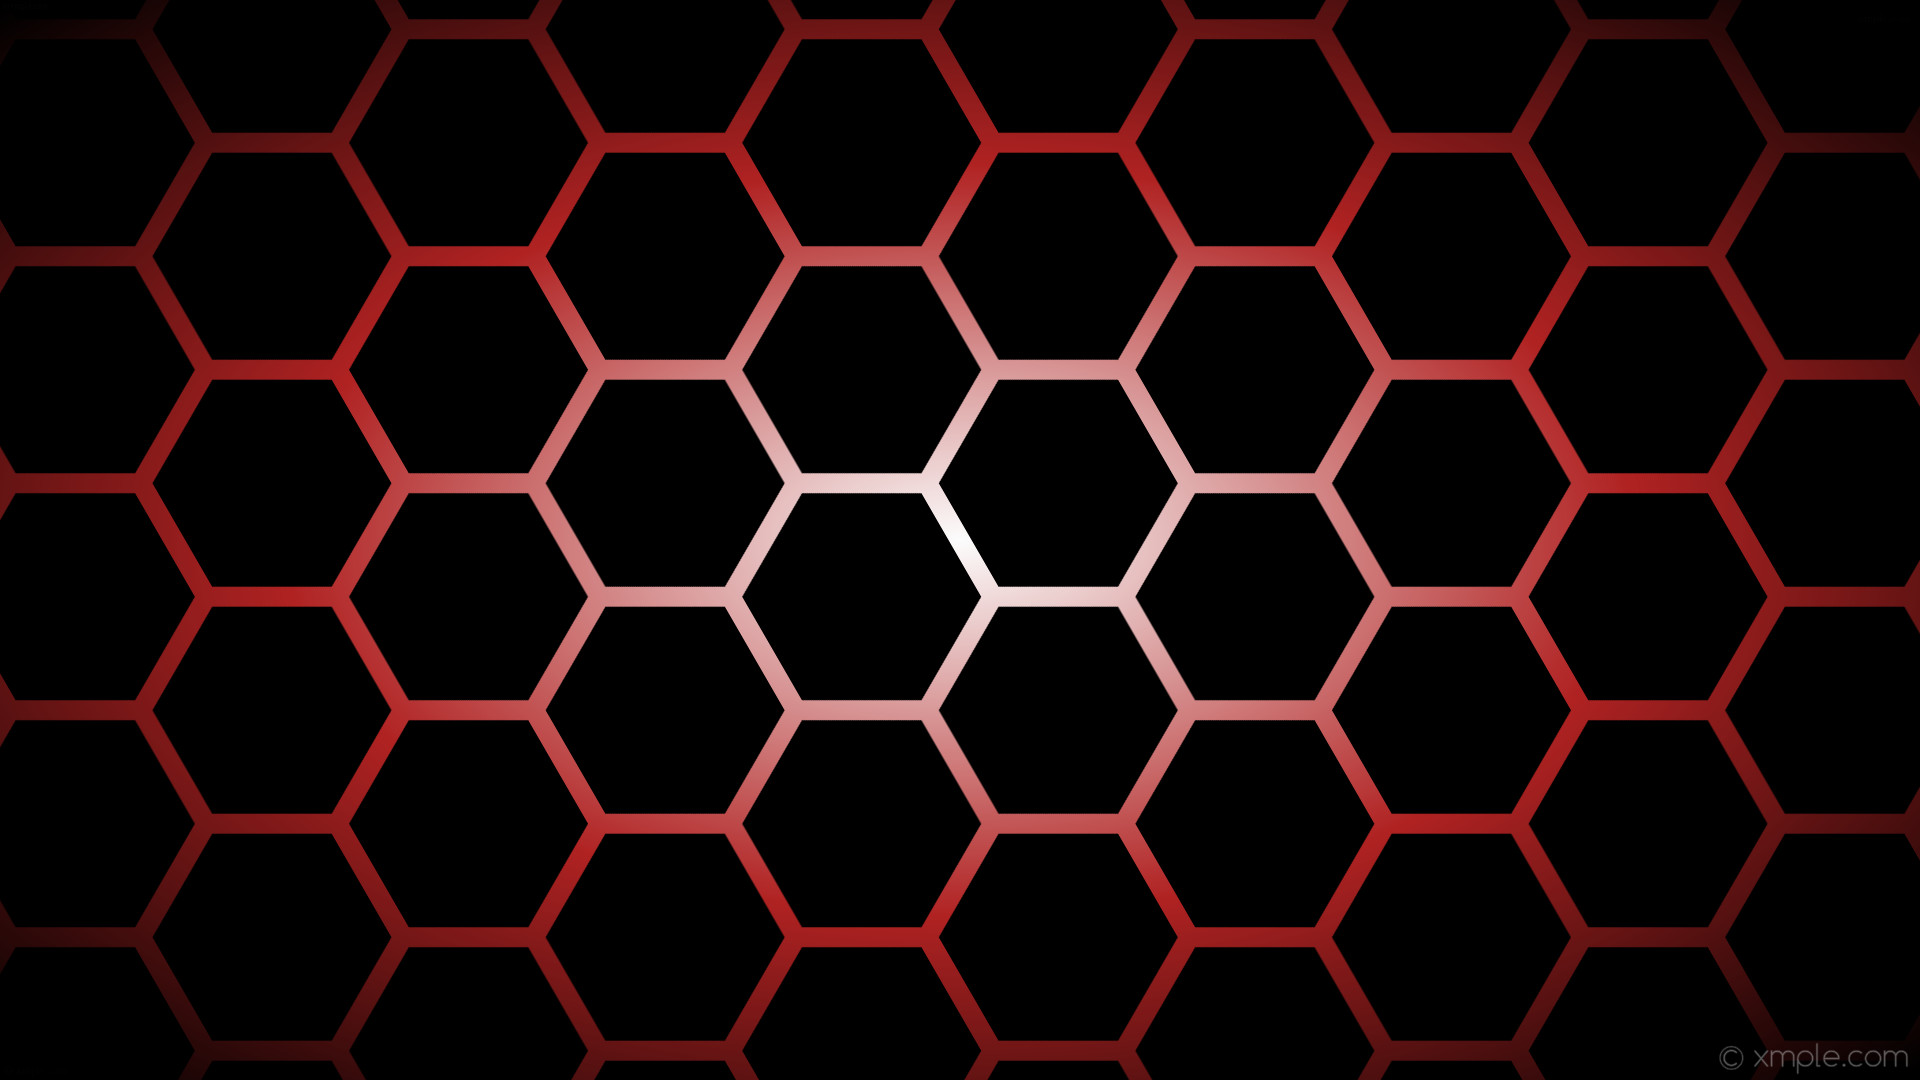 1920x1080 Images of Red Hexagons Live Wallpaper - #SC ...